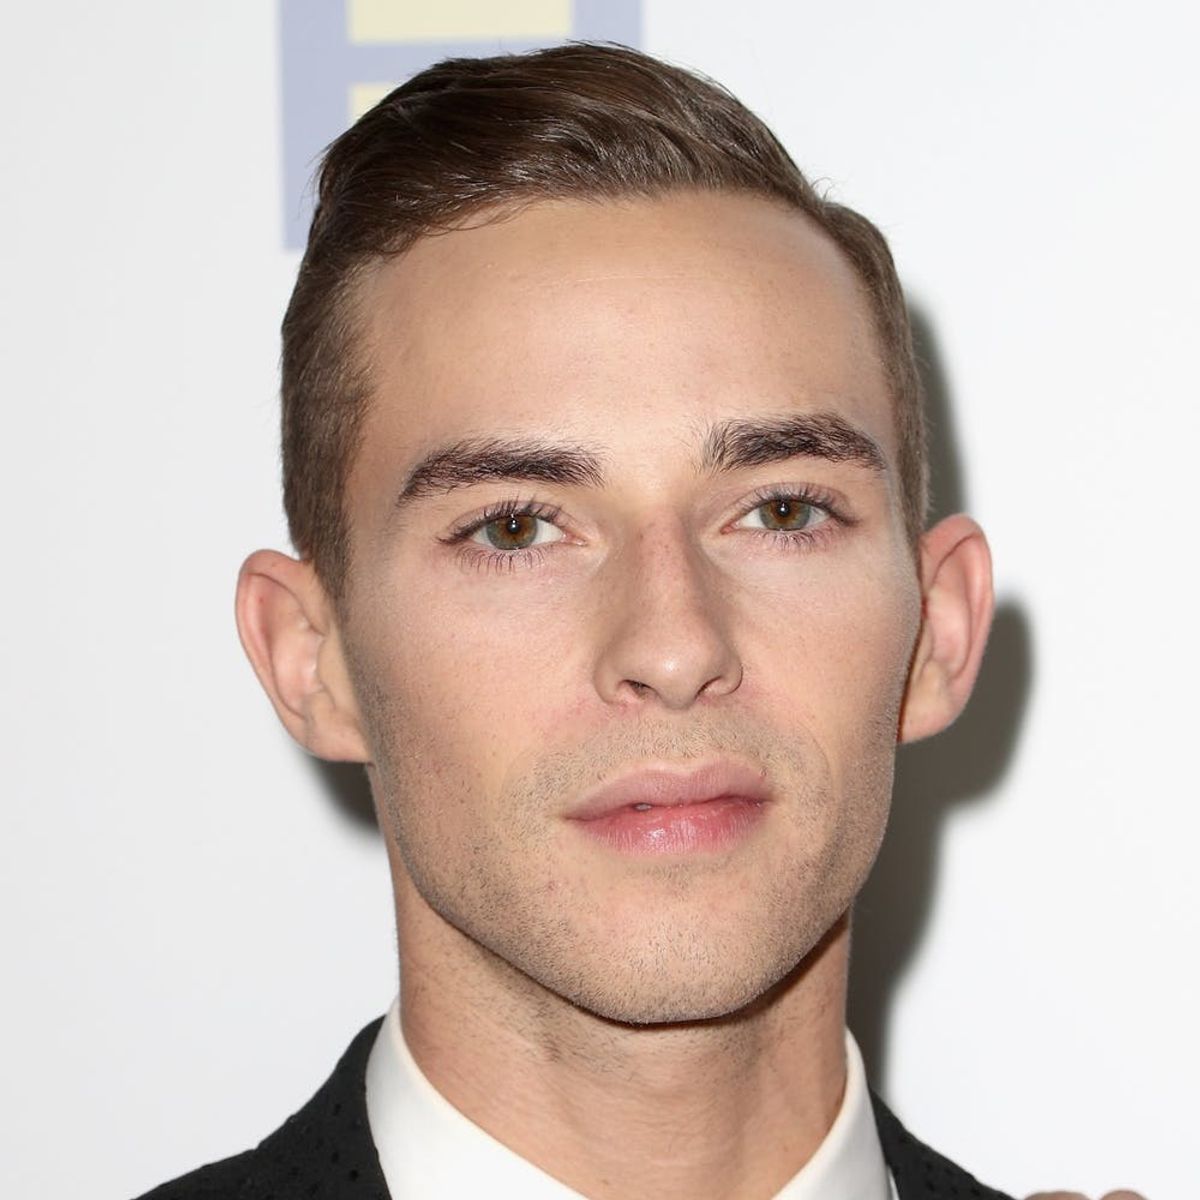 OMG: Sally Field’s Son Meets Adam Rippon After She Made a Move to Hook Them Up on Twitter